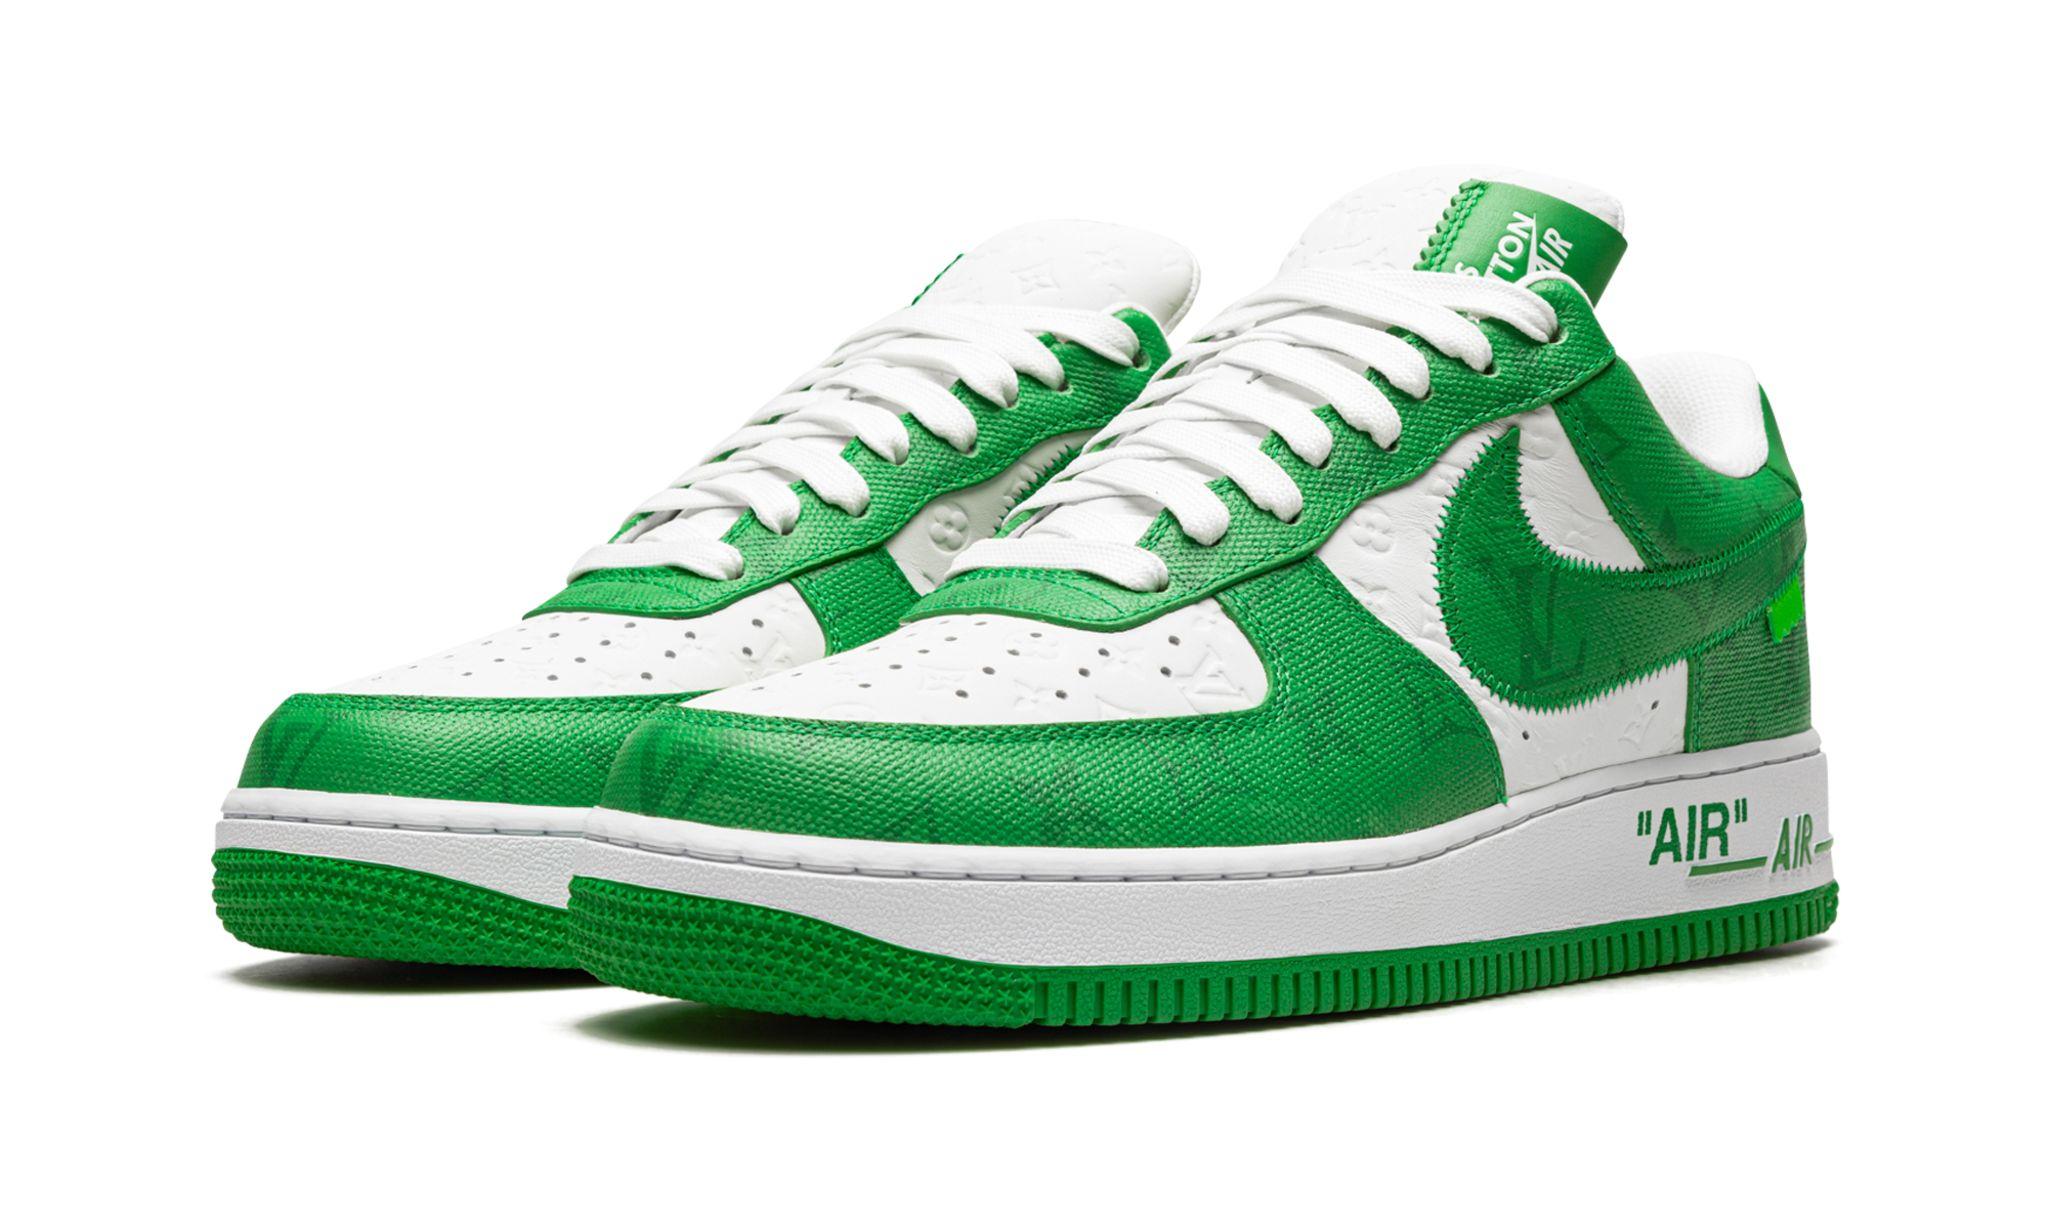 How to Buy Louis Vuitton x Nike Air Force 1 Sneakers by Virgil Abloh